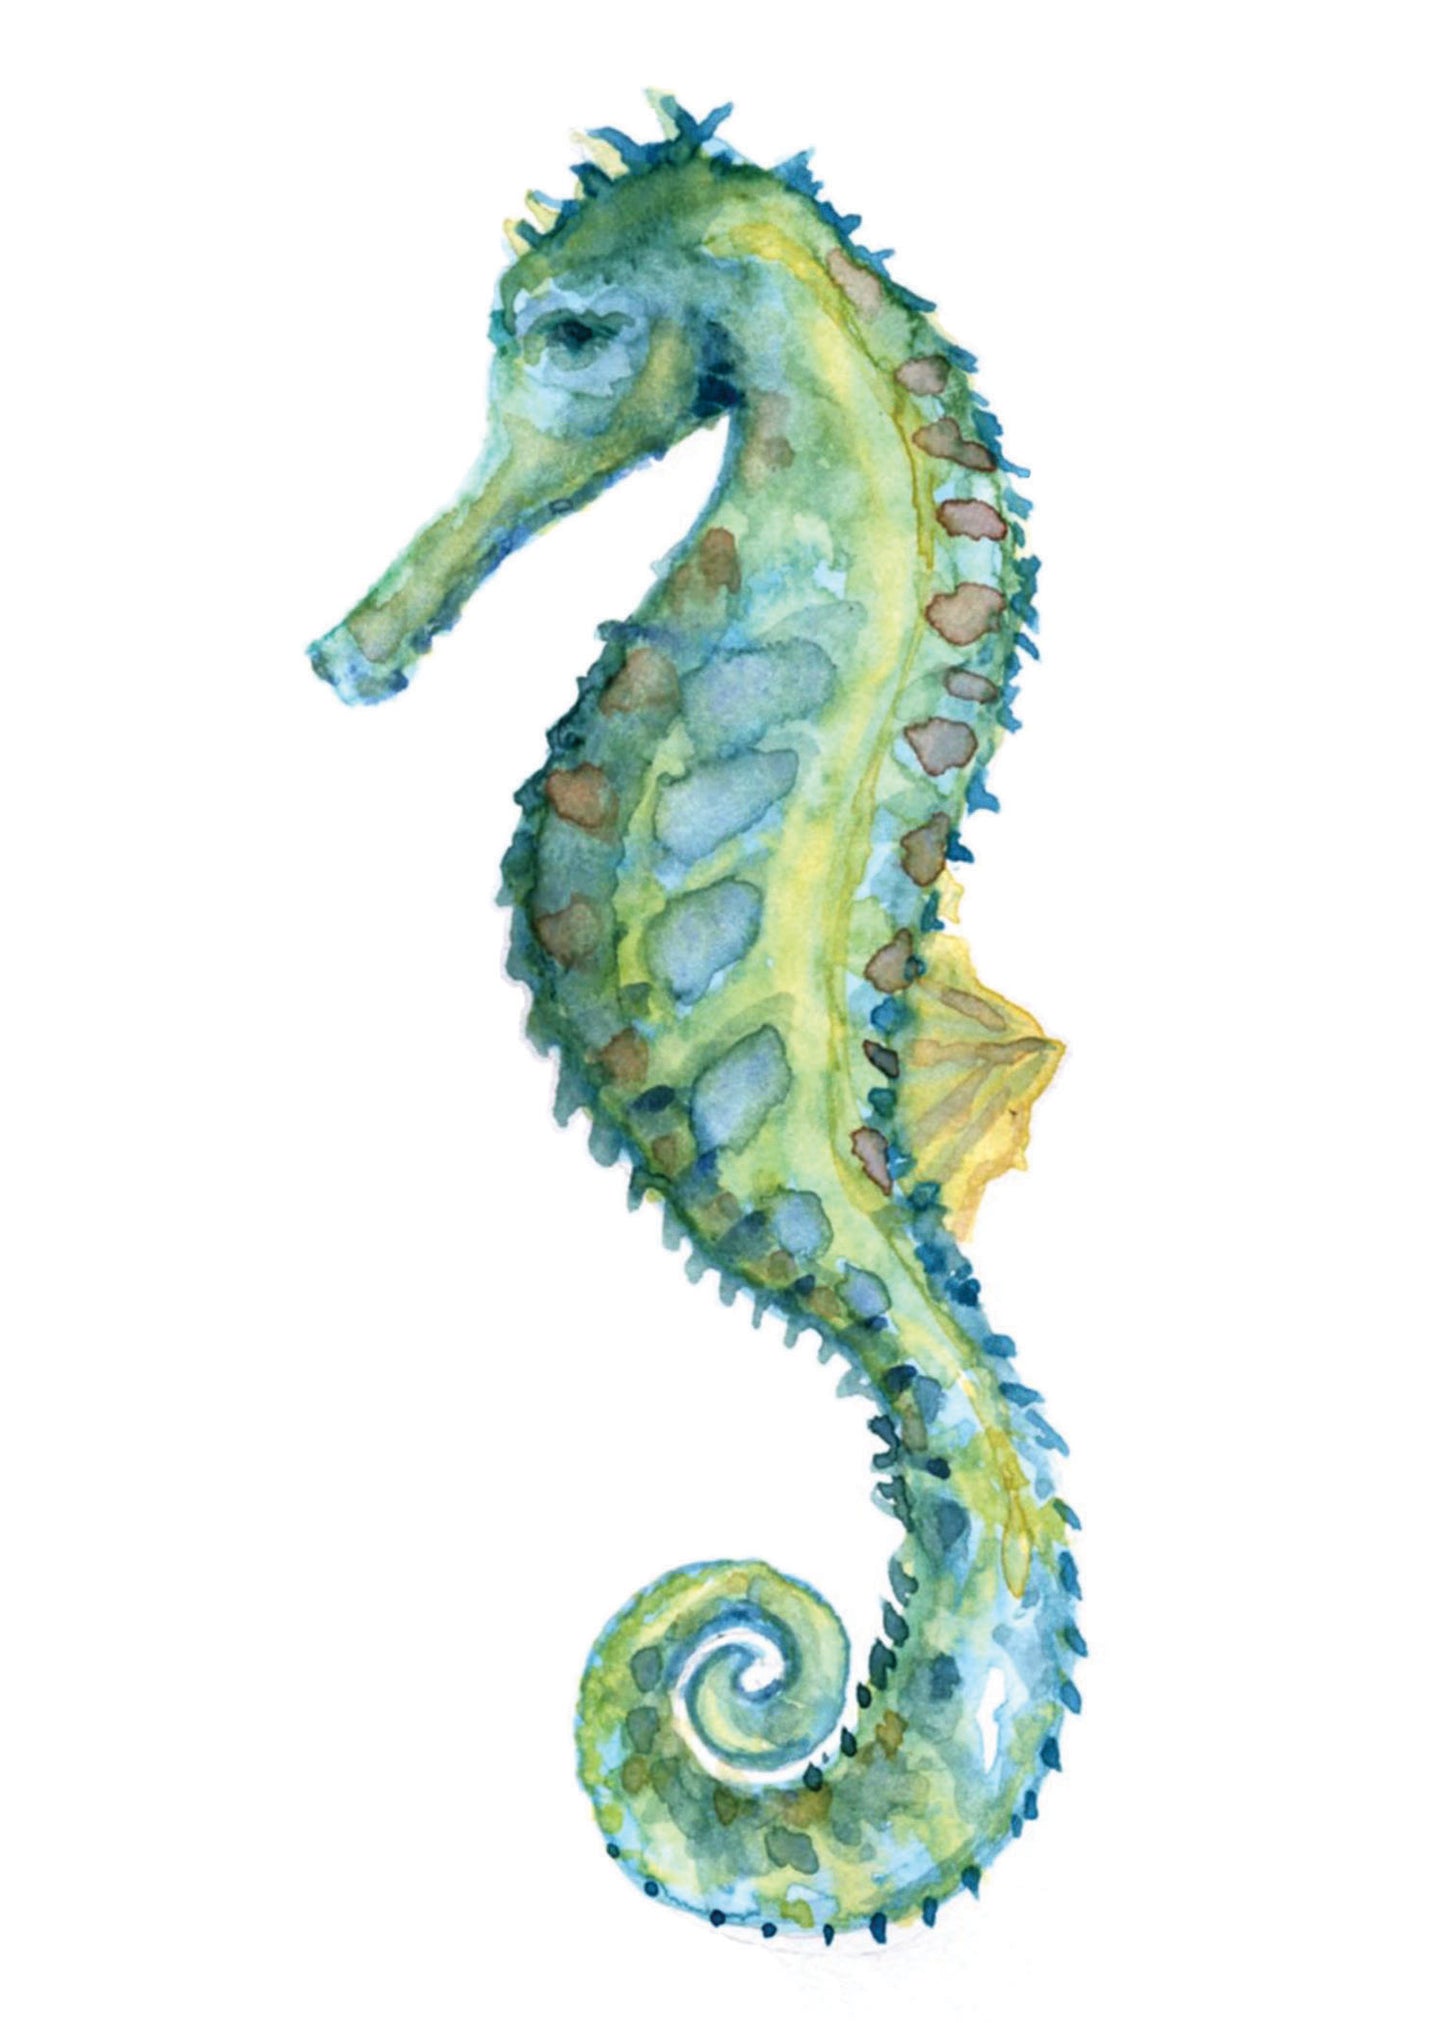 Blue Seahorse Watercolor Print and Art 8x8 for Flamingo or - Gifts Wood Home Block Original Decor – 5x5 Shores on